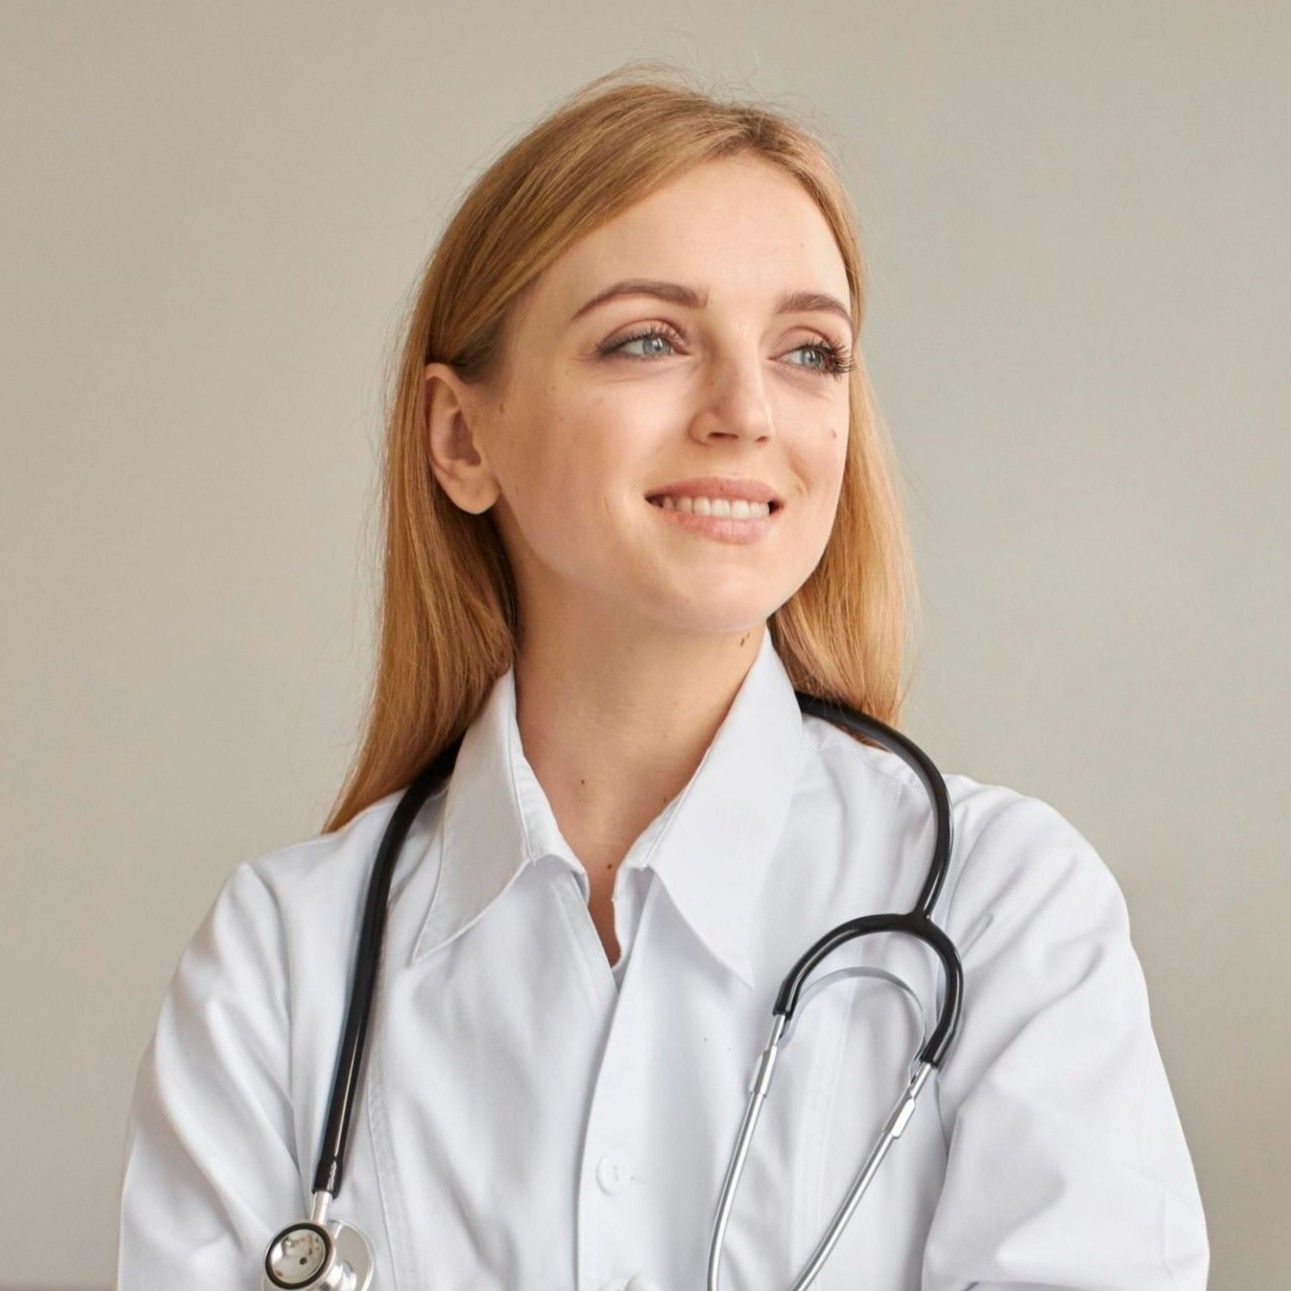 PracticeUP subscription photo of a young female doctor wearing a stethoscope